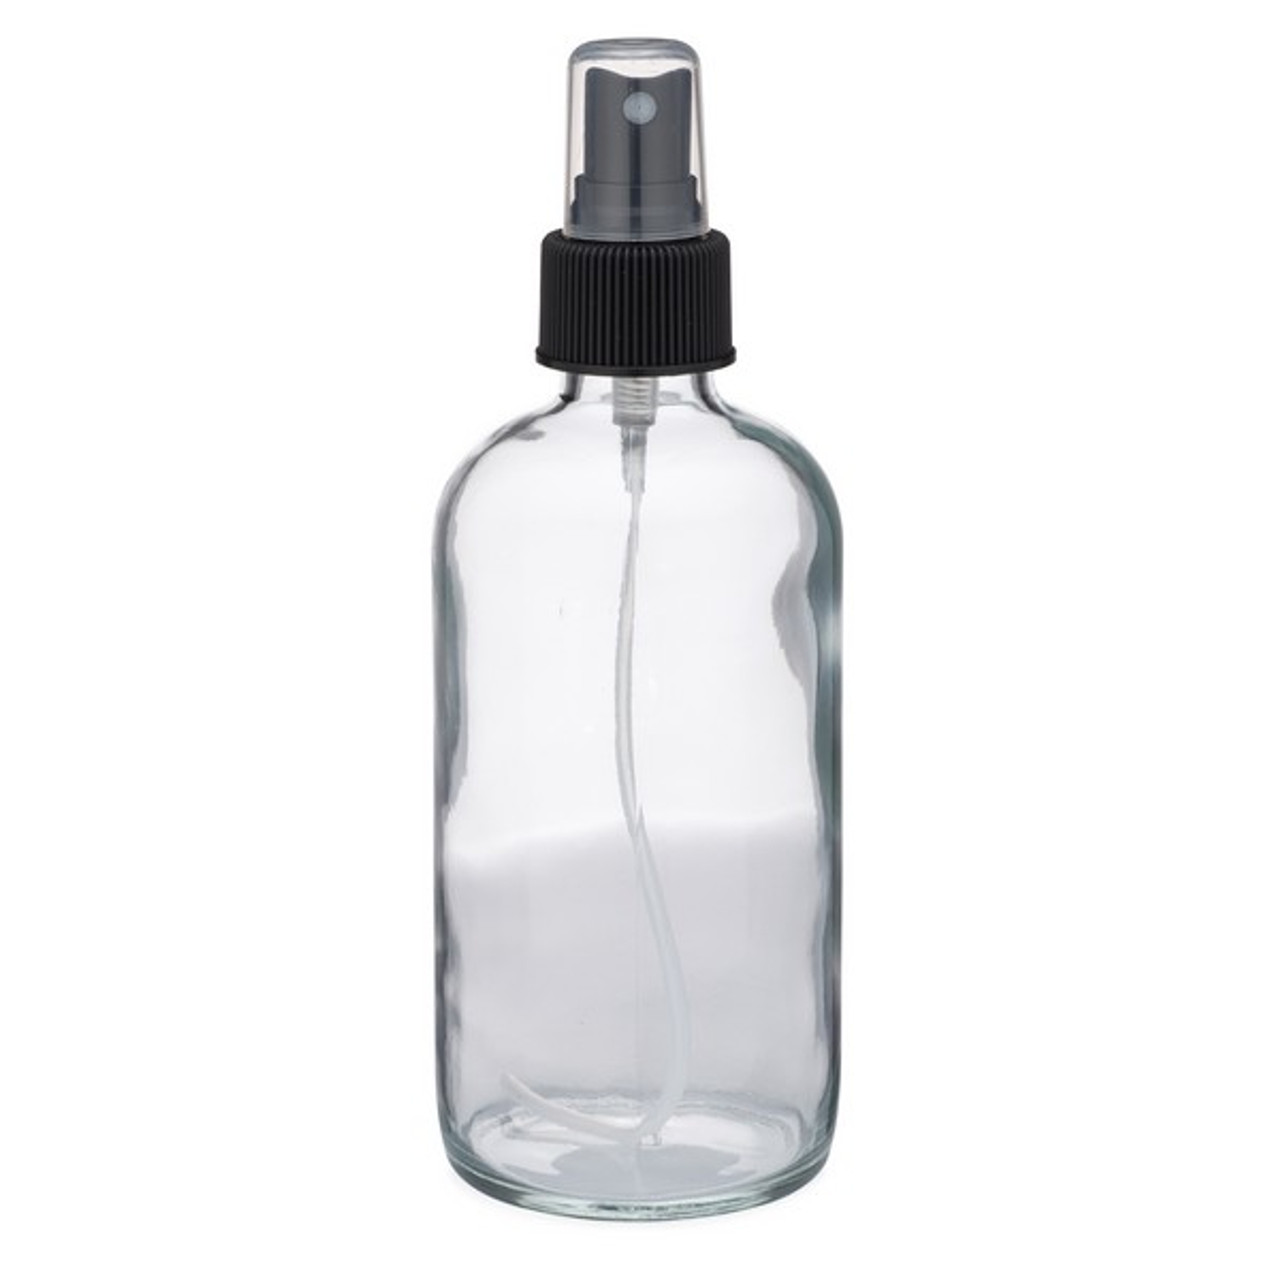 8 oz Clear Glass Boston Round Bottles (Cap Not Included) - 4699B09-BCLR